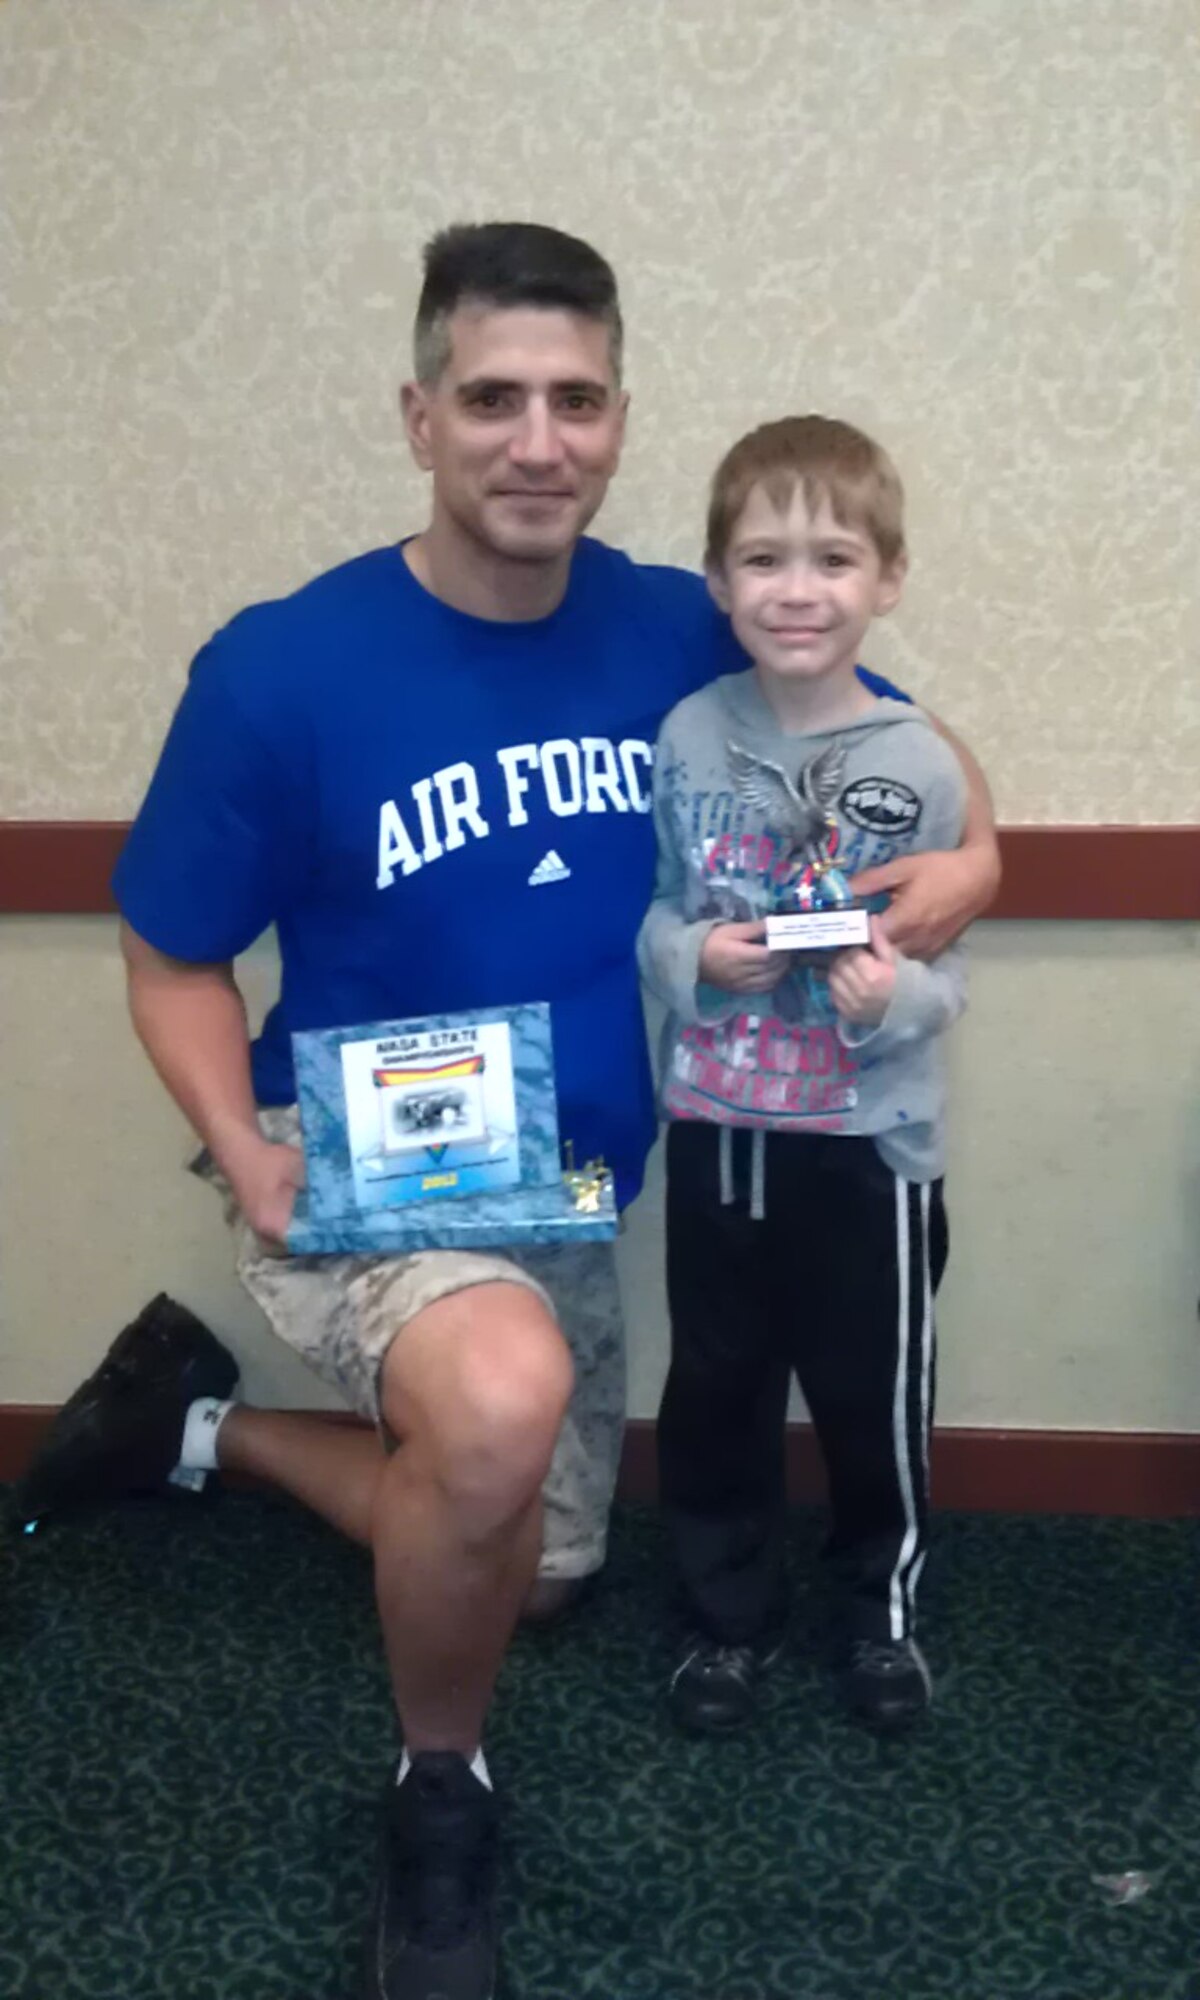 DALLAS, Texas - Lt. Col. Michael Jones, 17th Logistics Readiness Squadron Commander poses with his son Tony after winning first place in the "pure," meaning lifetime steroid free category, and the over age 40 category, at the Natural Athlete Strength Association sponsored Powerlifting Championship, March 10. (Courtesy Photo)



